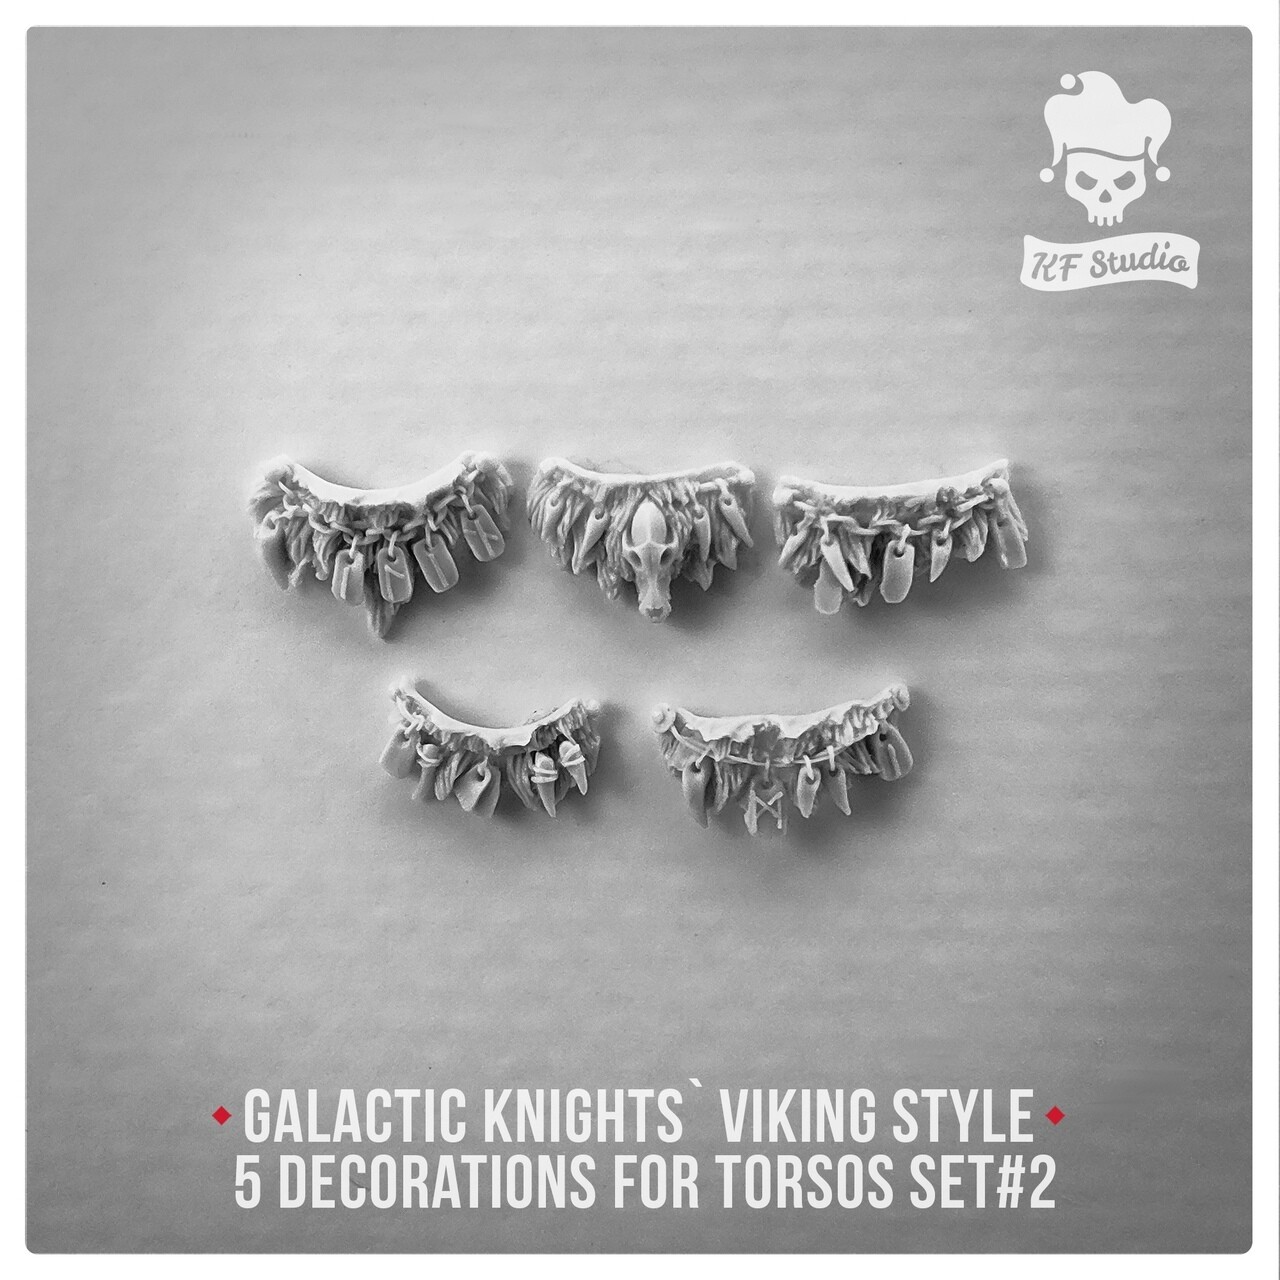 Galactic Knights Viking Style Decorations for torsos Set#2 by KFStudio